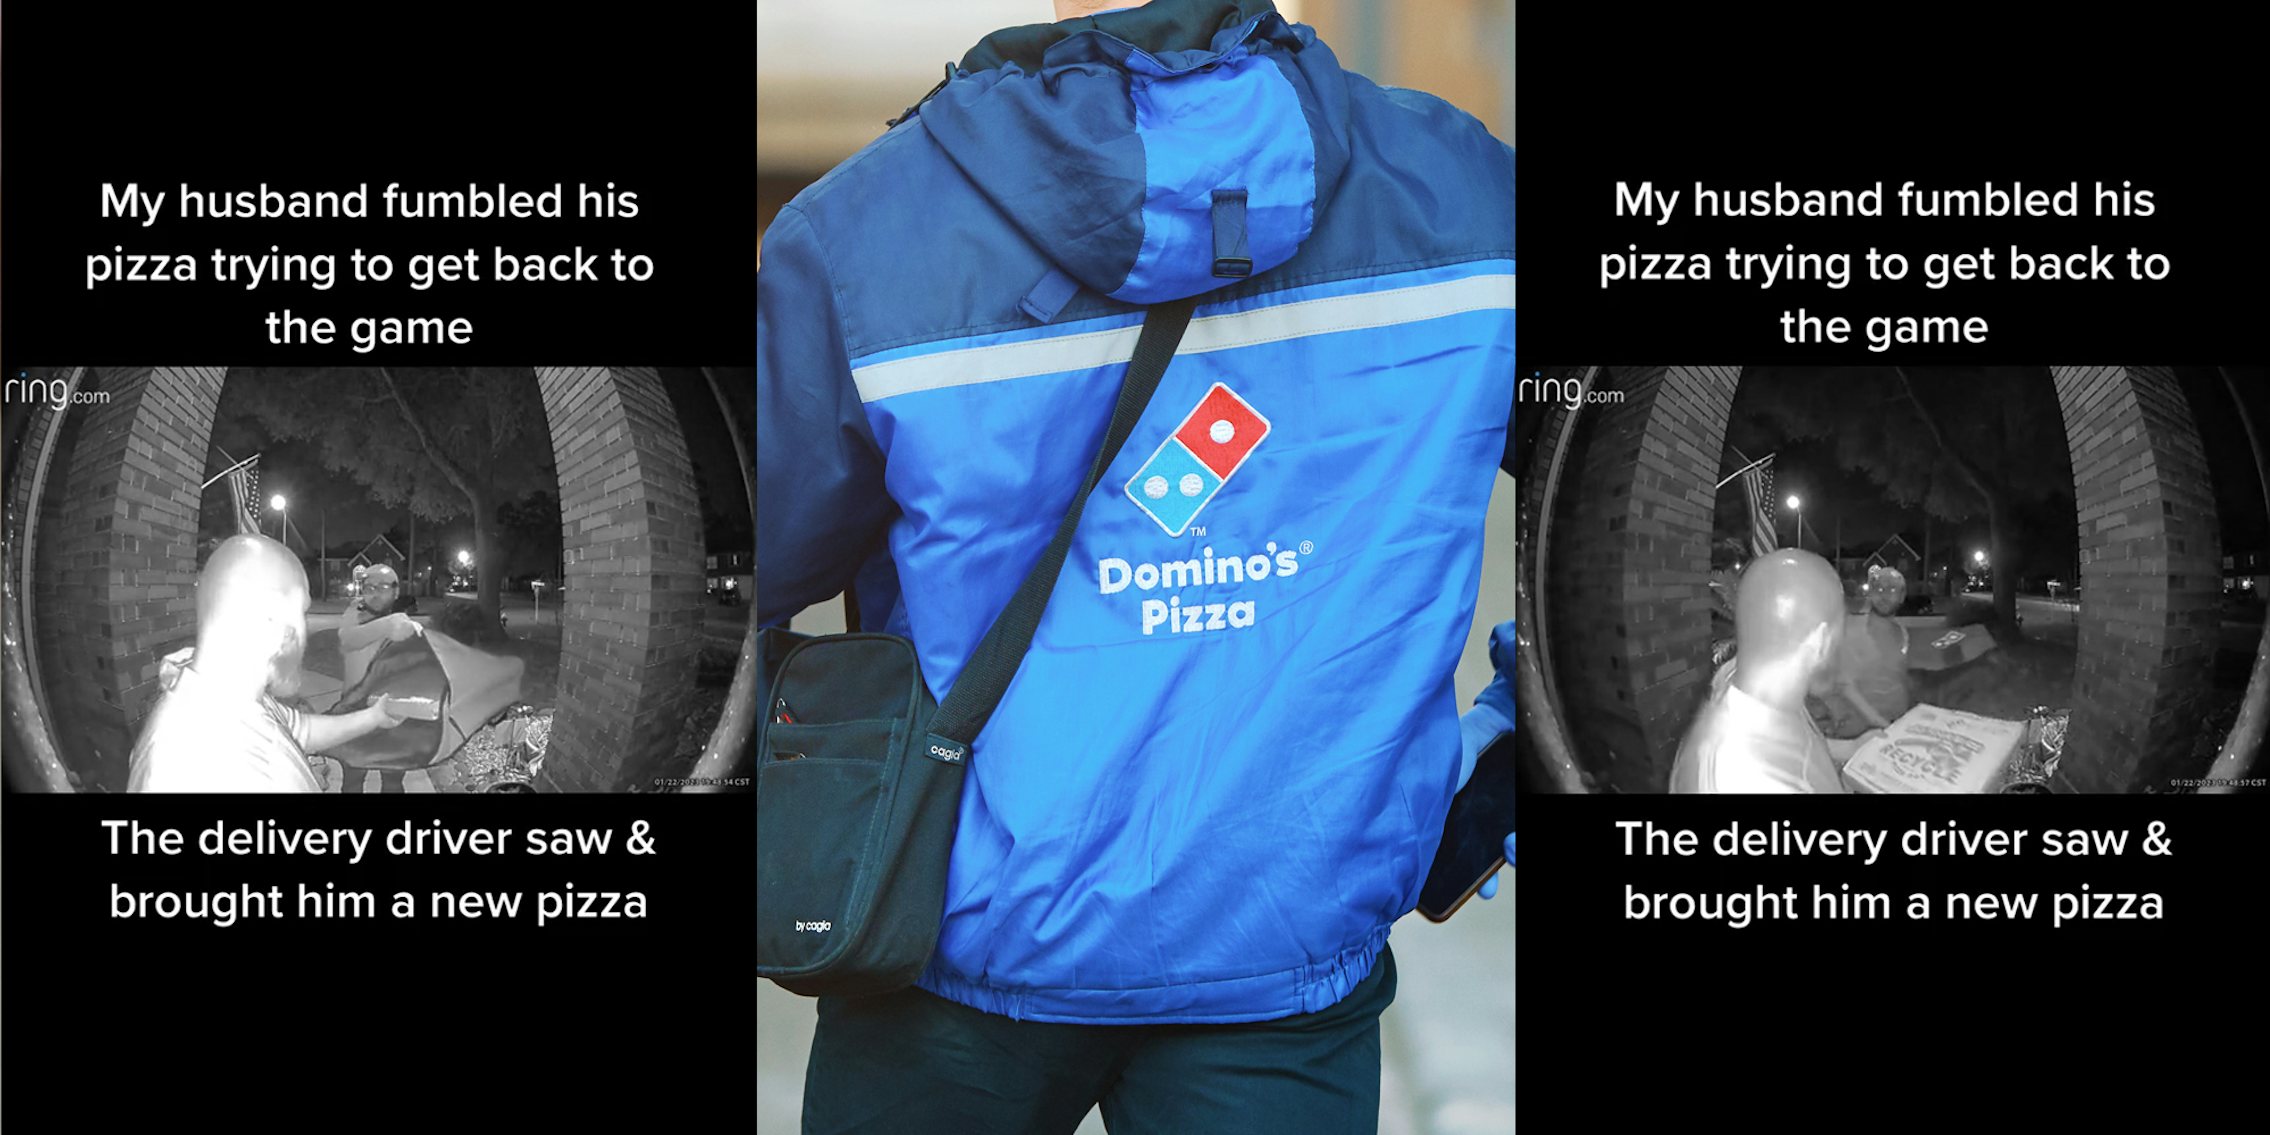 ring.com doorcam with Dominos delivery driver giving customer new pizza with caption 'My husband fumbled his pizza trying to get back to the game The delivery driver saw & brought him a new pizza' (l) Domino's delivery driver with branded jacket (c) ring.com doorcam with Dominos delivery driver giving customer new pizza with caption 'My husband fumbled his pizza trying to get back to the game The delivery driver saw & brought him a new pizza' (r)